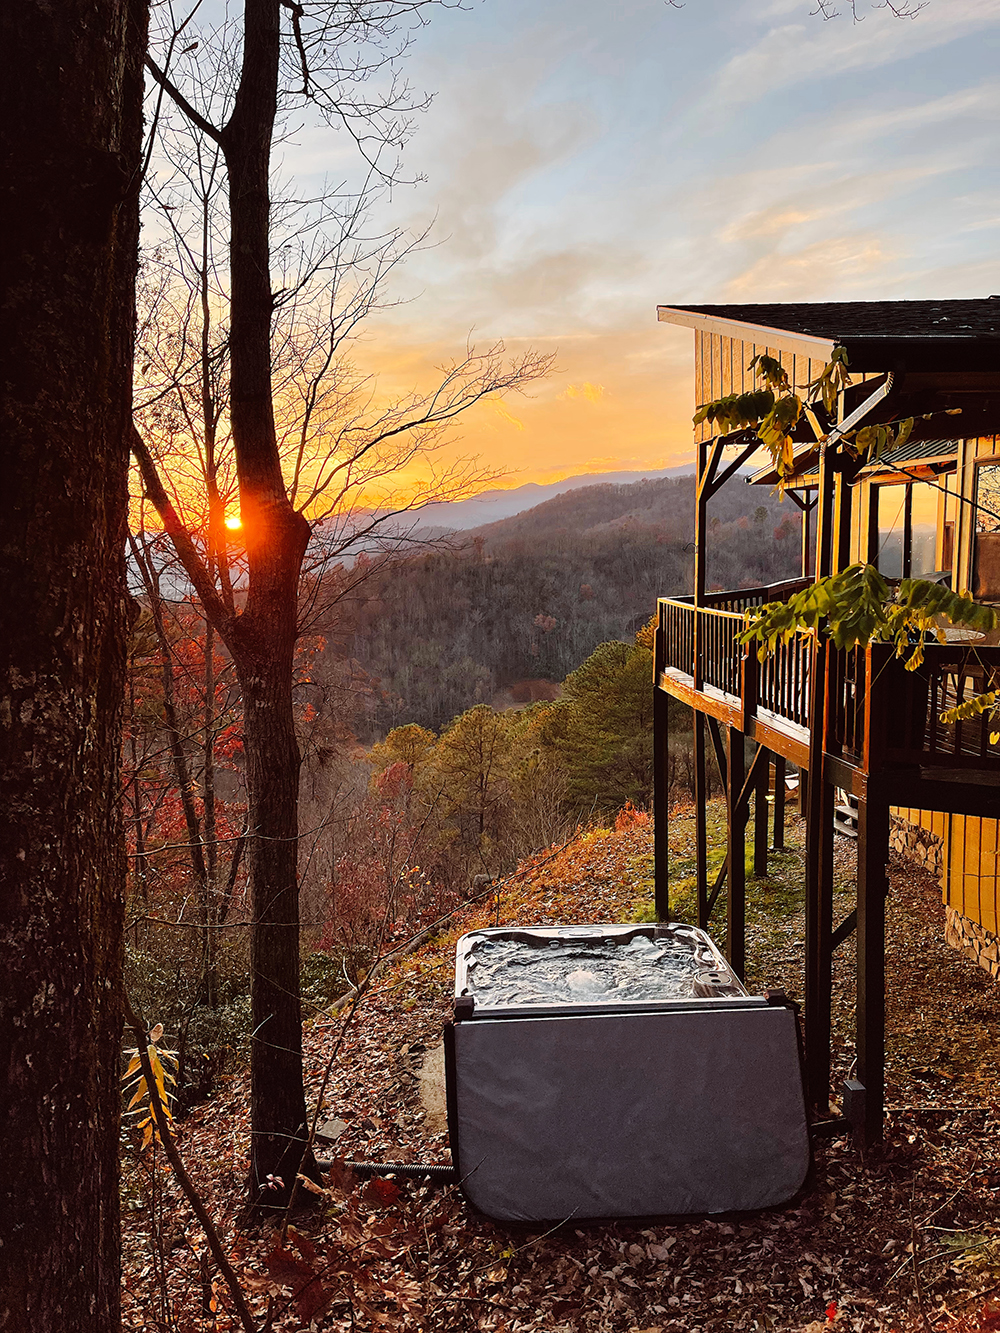 The Blues Mountainview Lodge, a blue Ridge Mountains cabin with Extreme Views